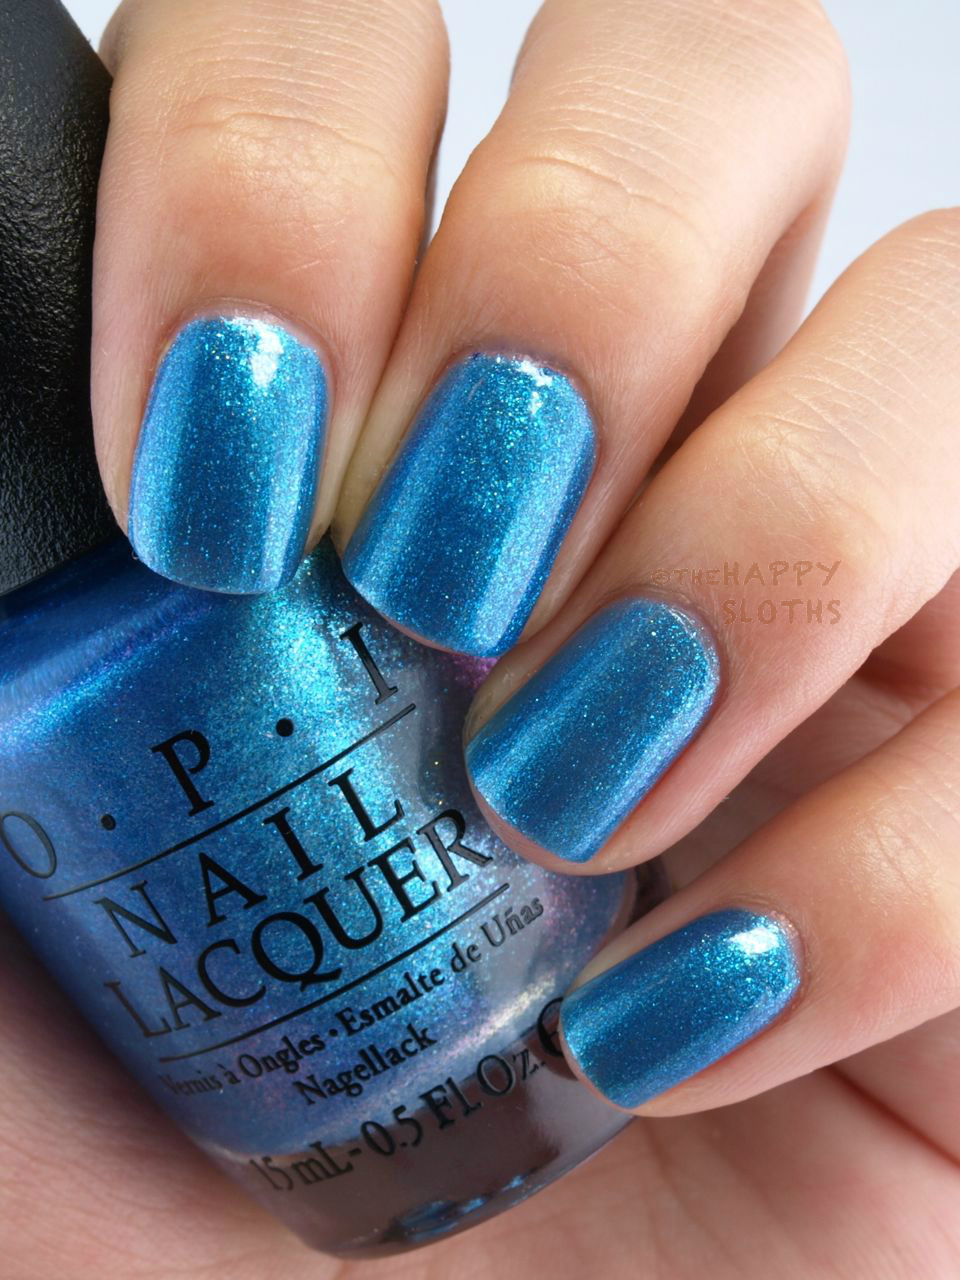 OPI Brights 2015 Summer Collection: Review and Swatches | The Happy ...